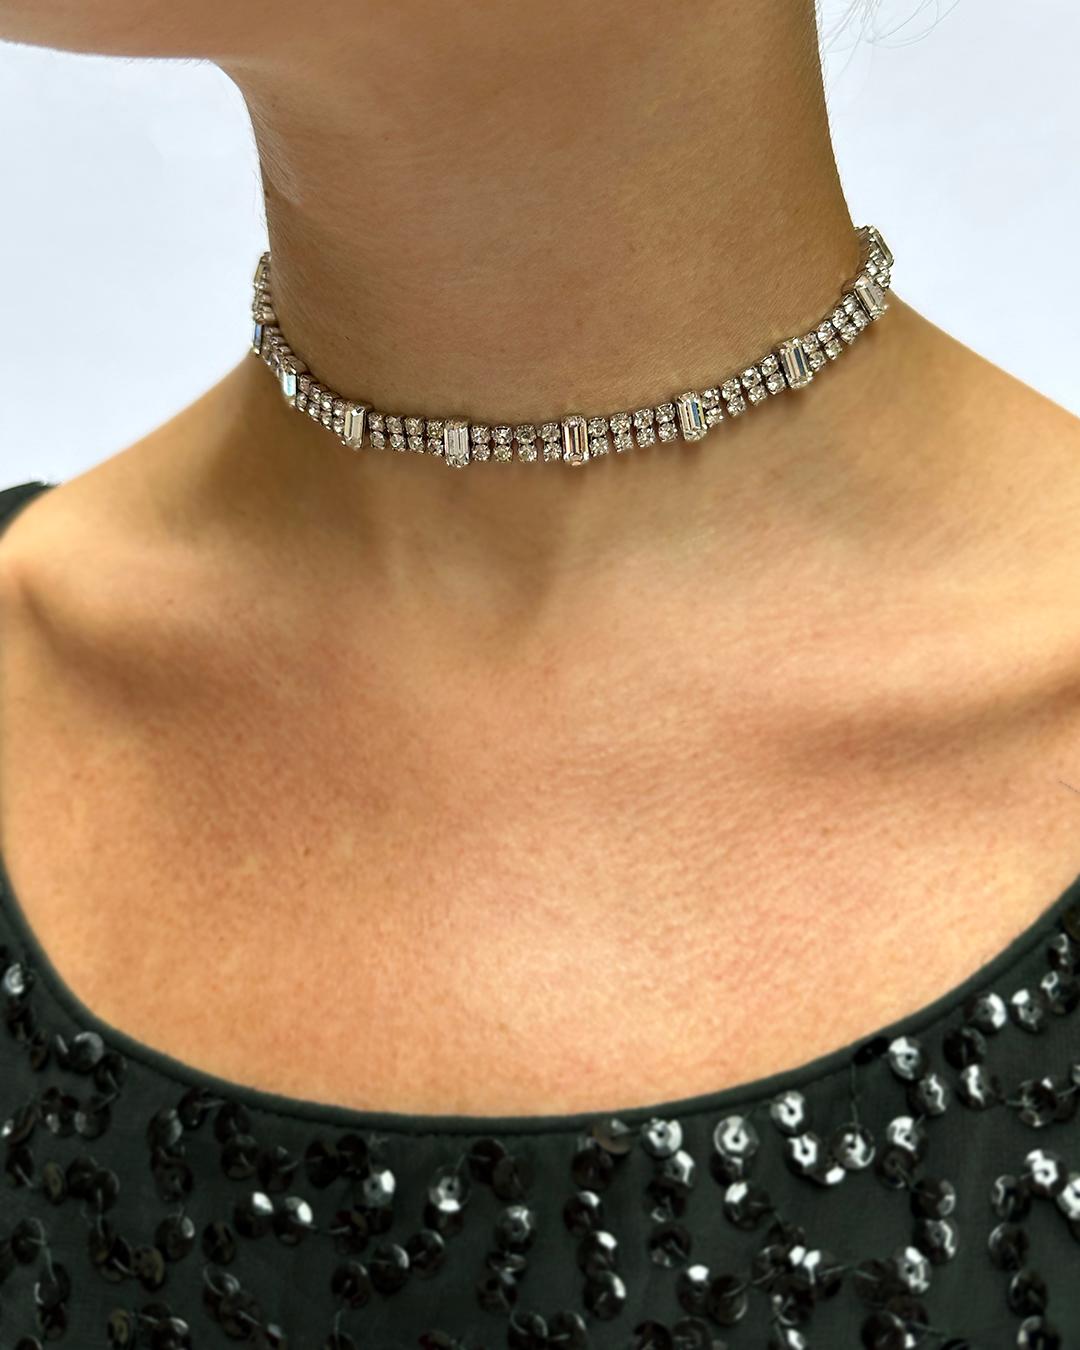 VERY BREEZY presents: This necklace is so perfect— it's surprisingly difficult to find these midcentury diamanté necklaces as a true choker length, and this one is so special, and in FABULOUS condition! It was made in the 1950s by Kramer, a New York